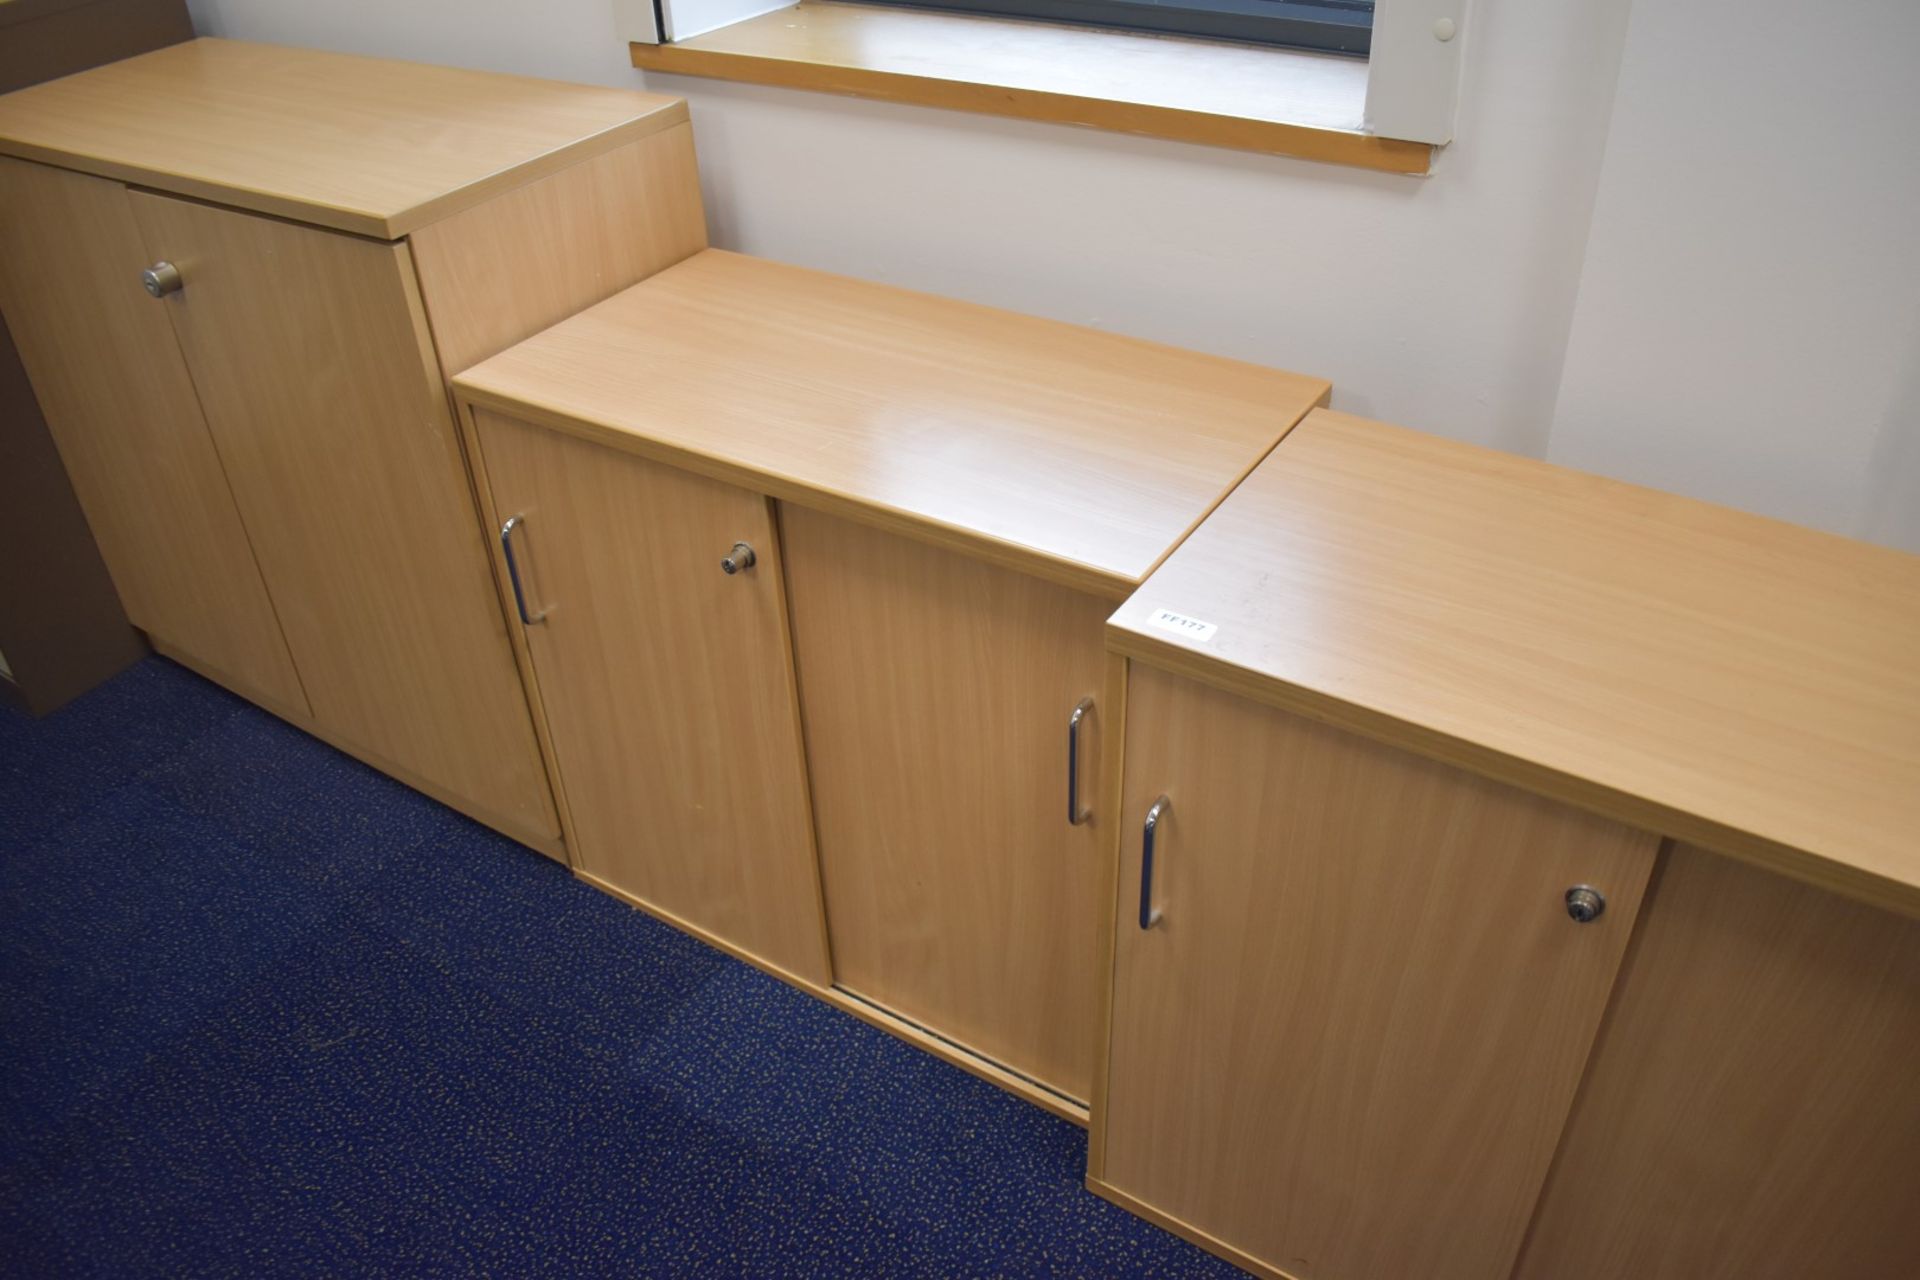 5 x Assorted Office Cabinets - Ref: FF177 D - CL544 - Location: Leeds, LS14Collections:This item - Image 2 of 4